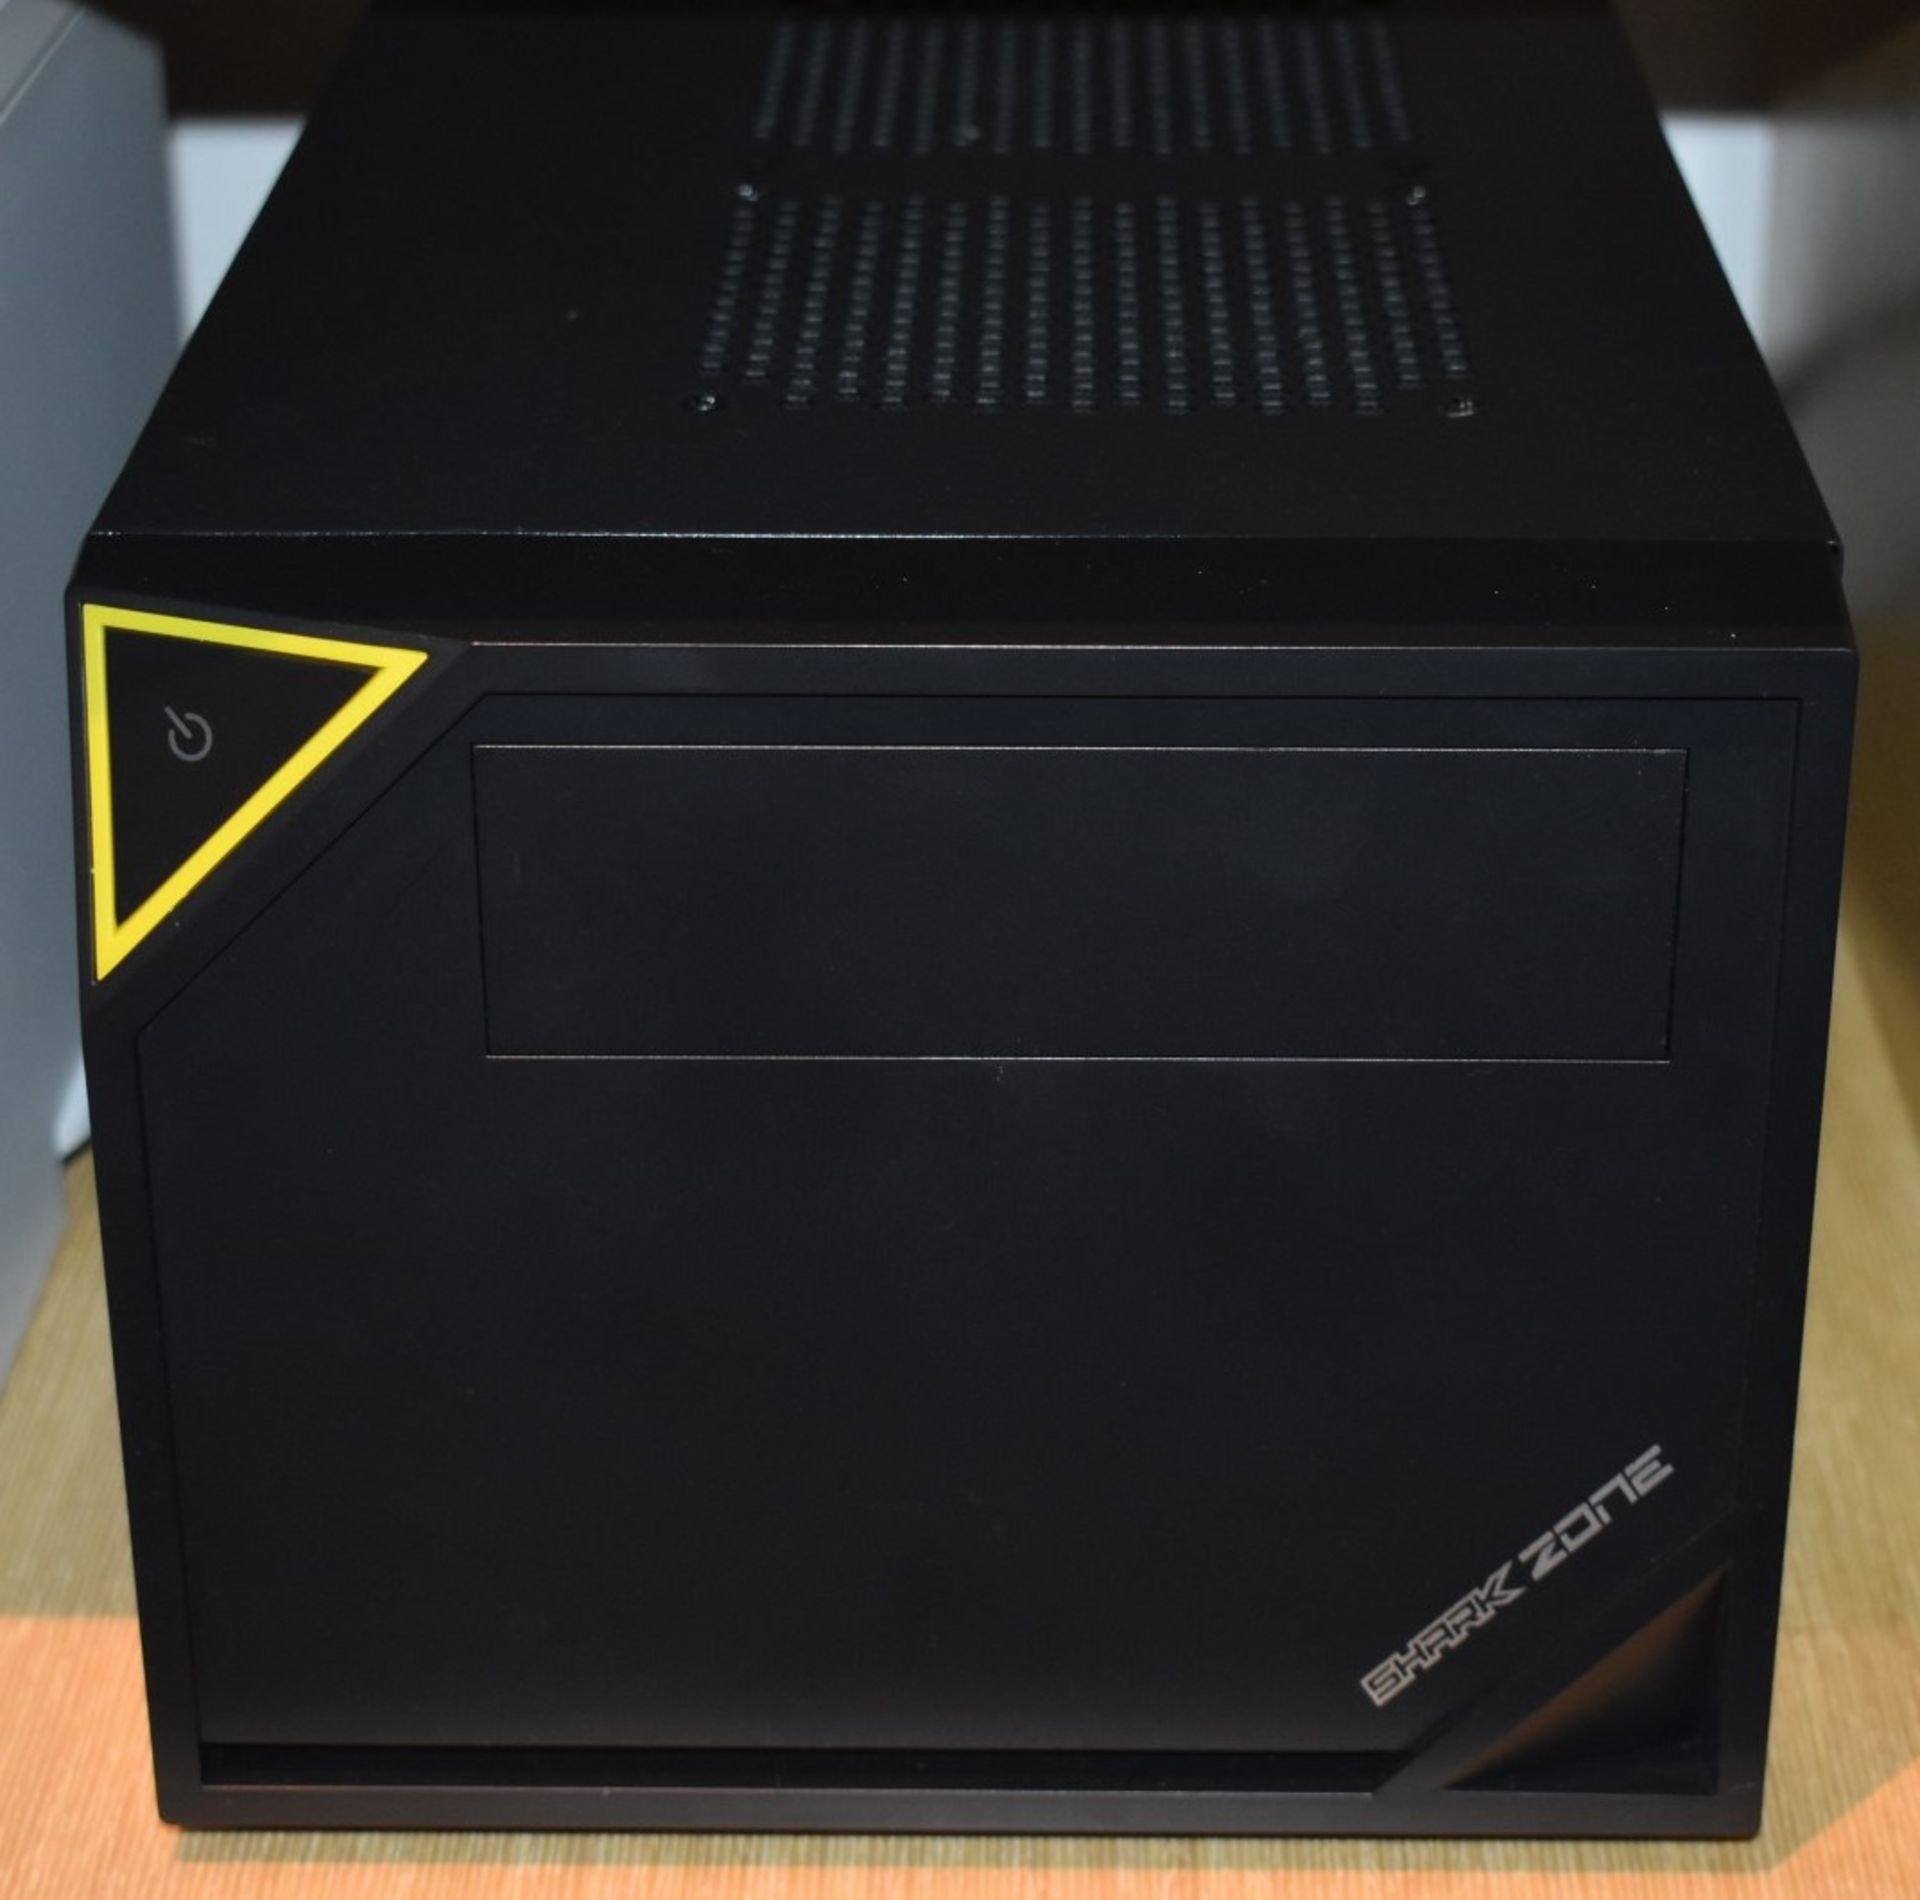 1 x Mini ITX Computer in Sharkroon PC Case - Features an Intel I5-4590T 3ghz Quad Core Processor,